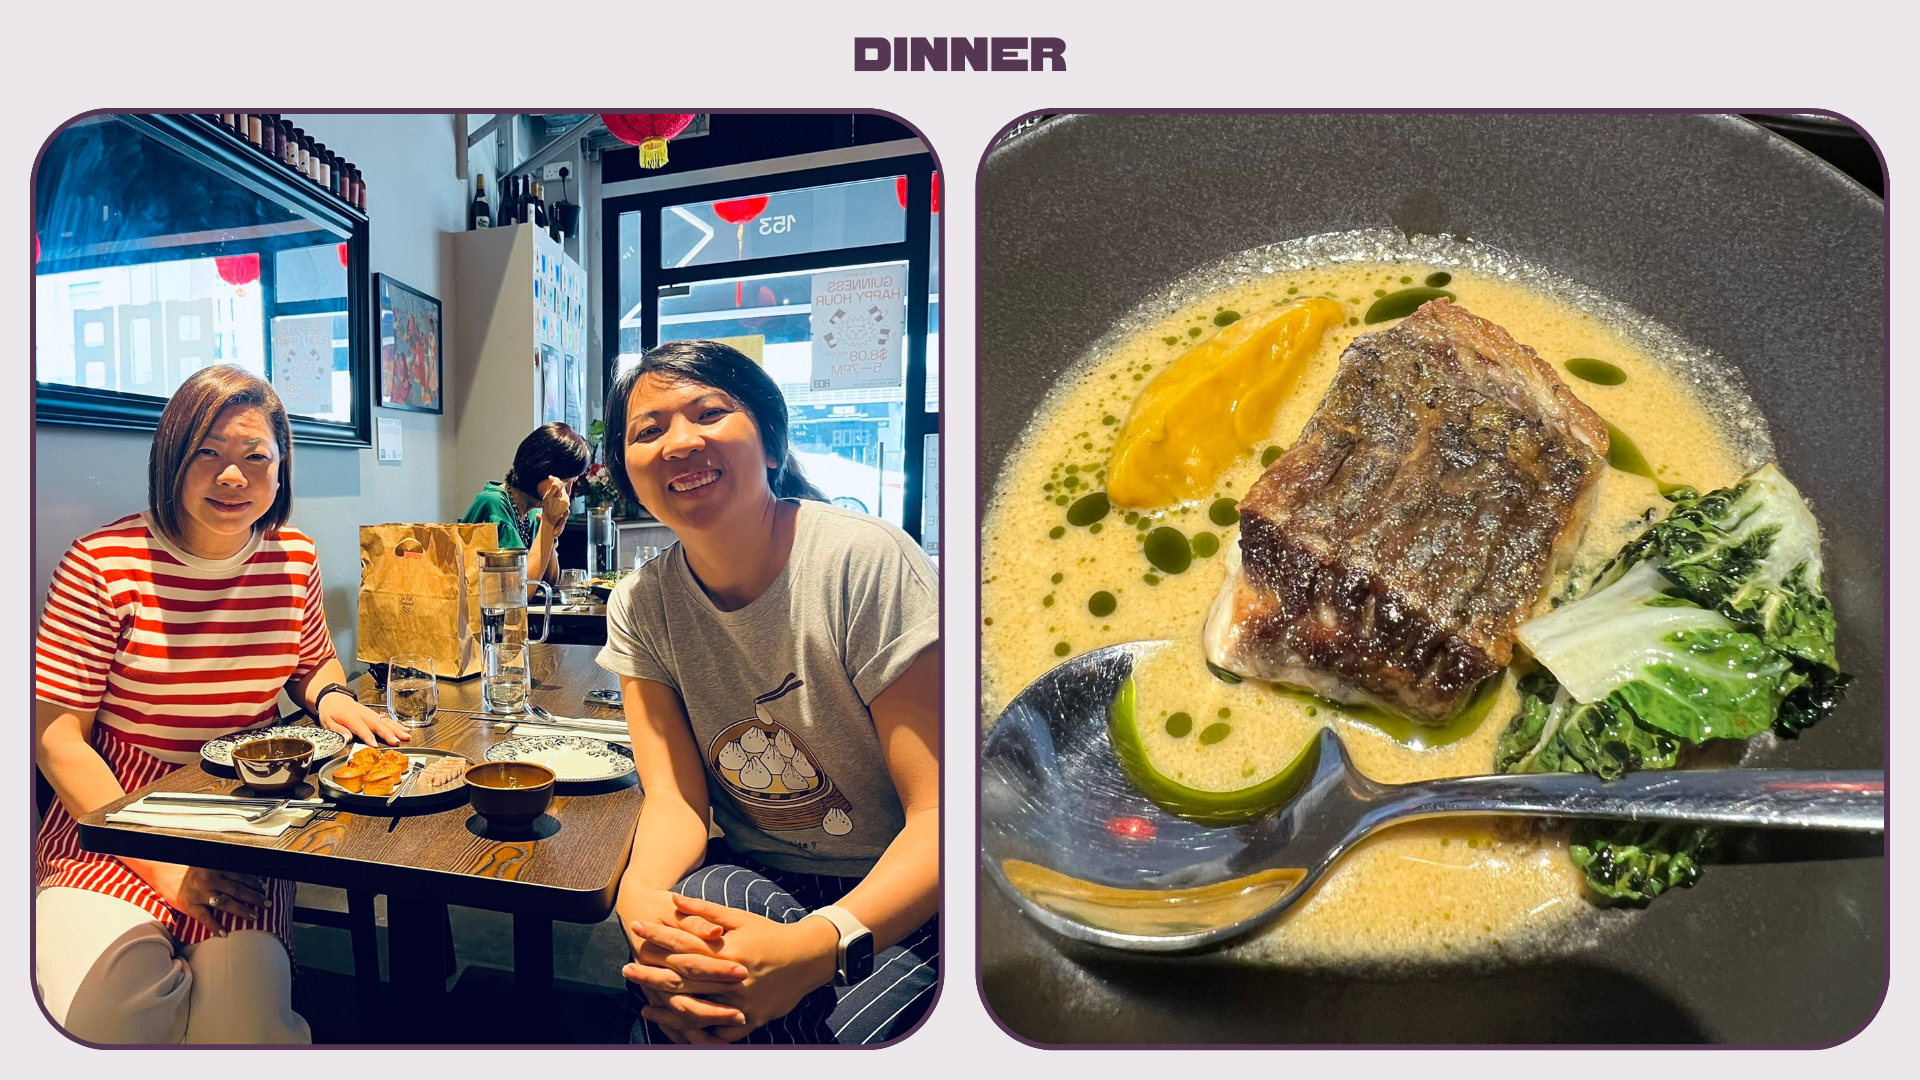 Left: Two people sat at a restaurant table smile at the camera. Right: a piece of cooked fish in broth